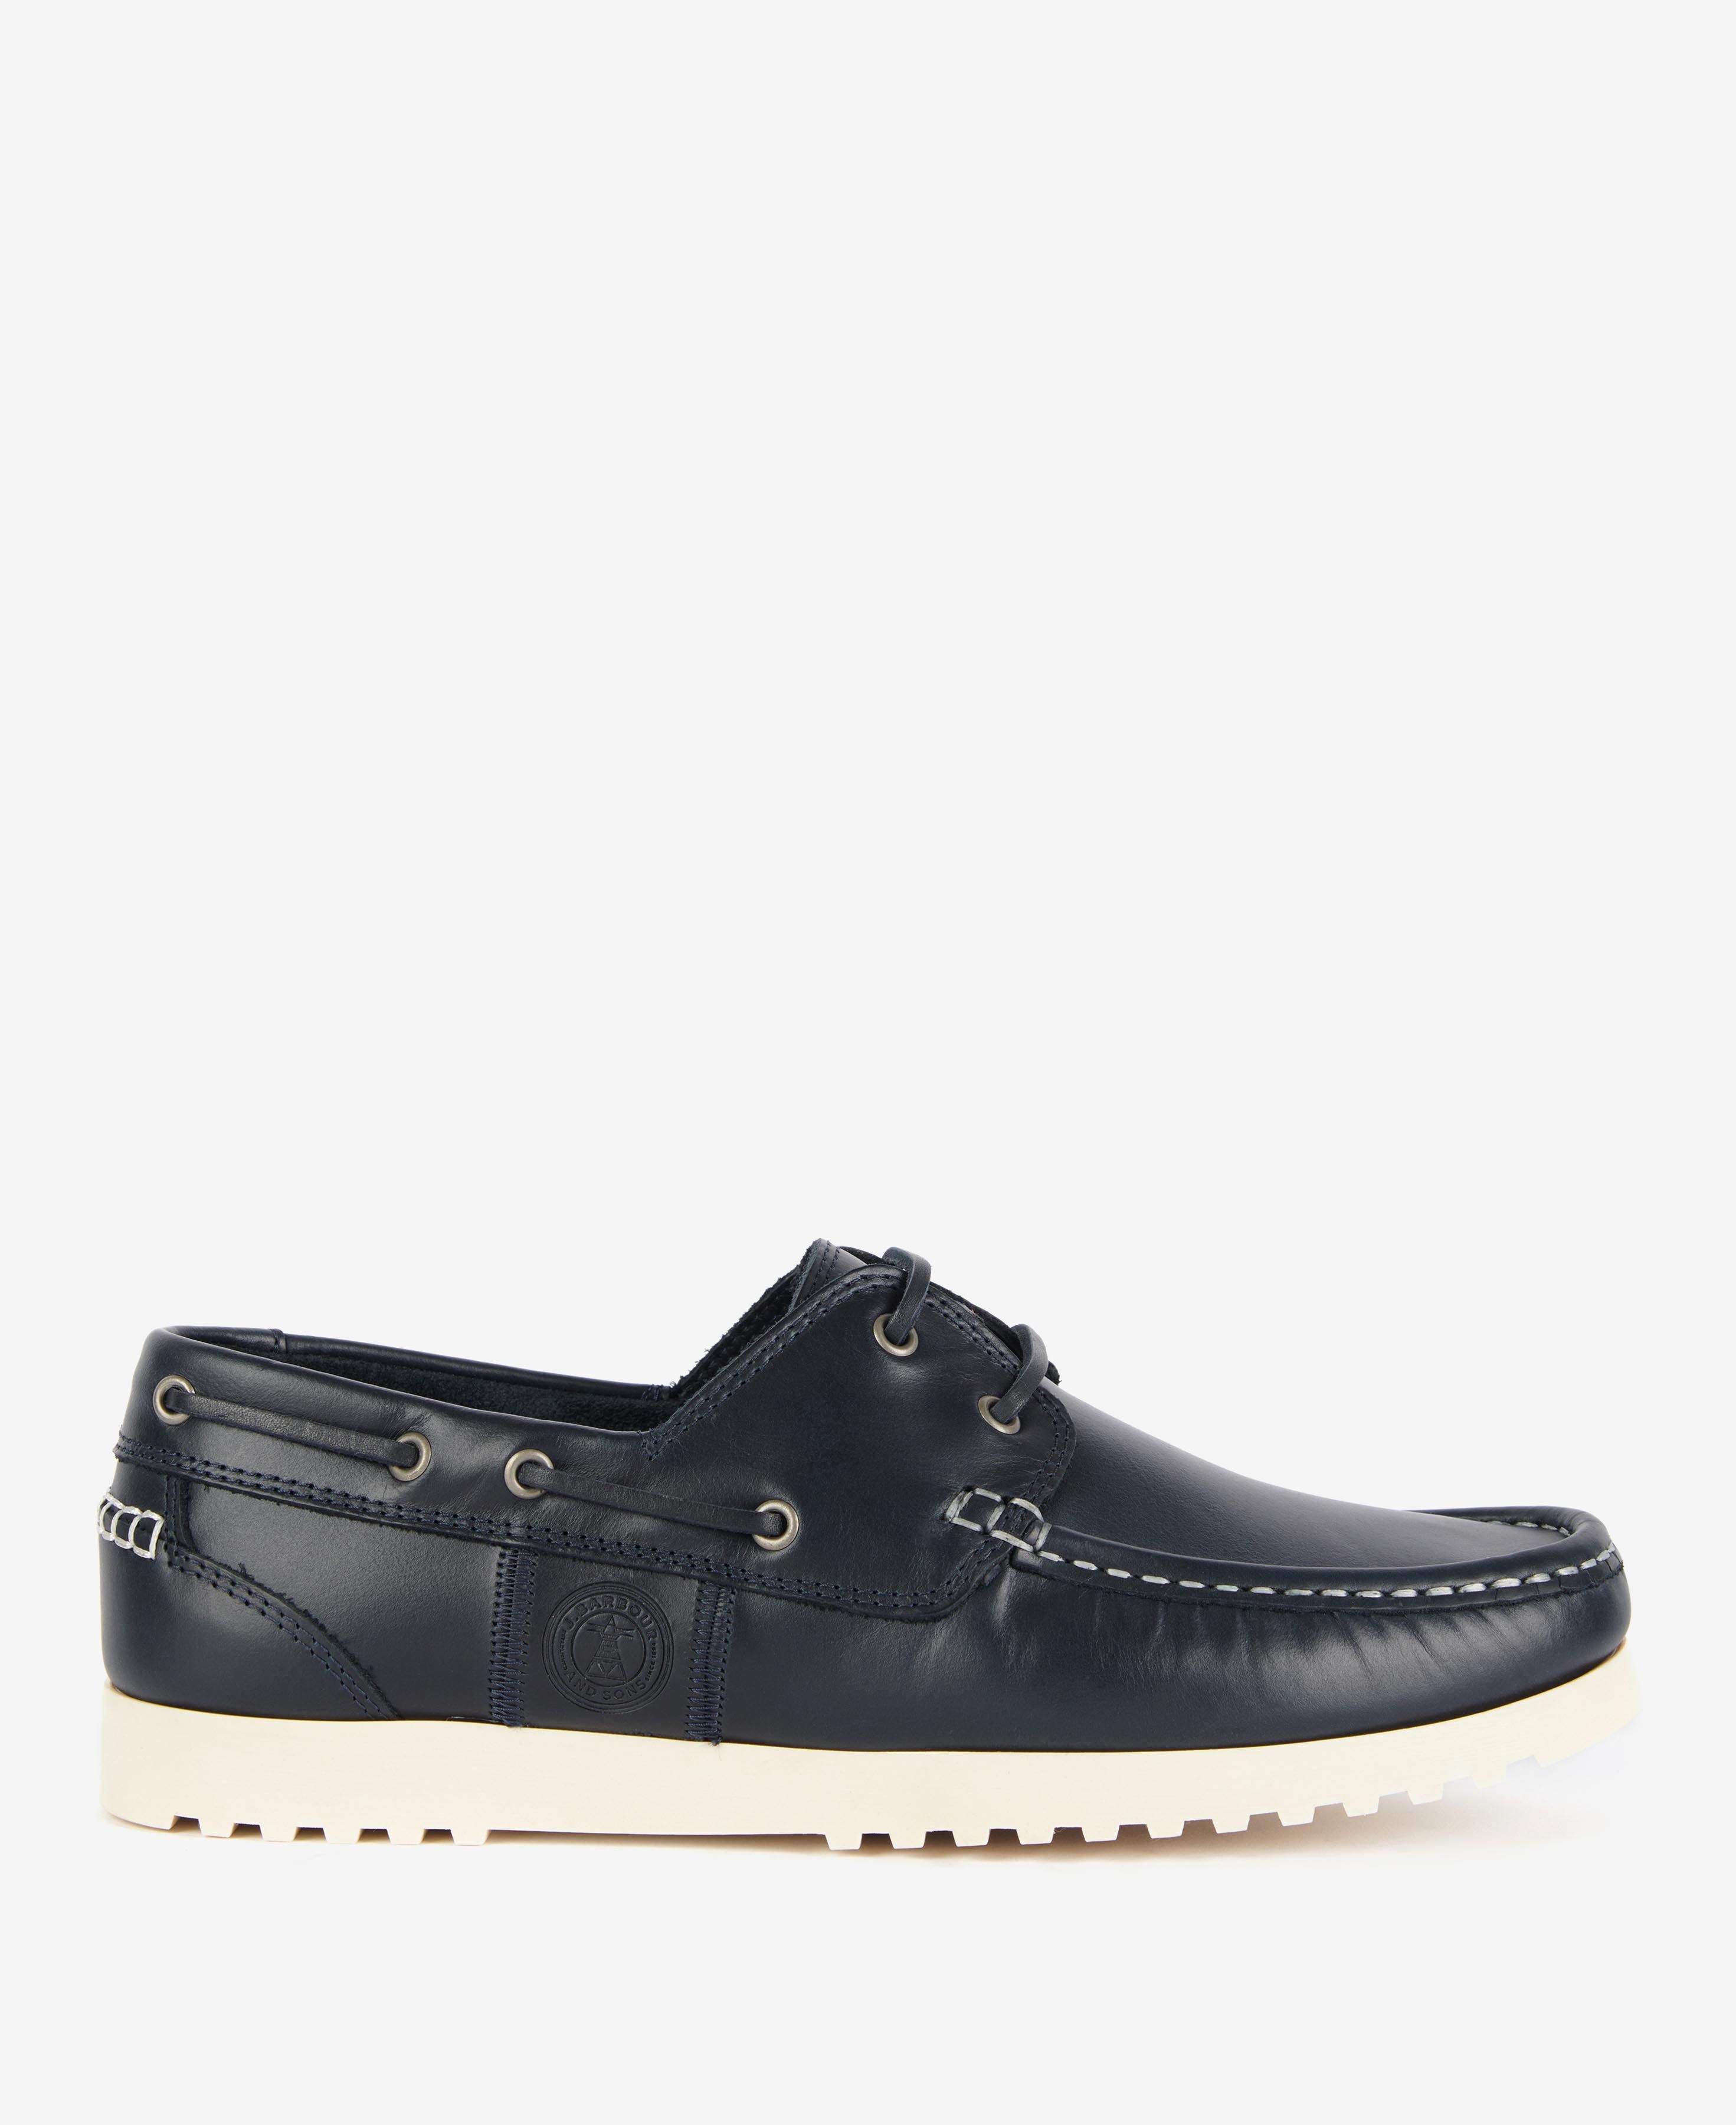 Barbour Seeker Boat Shoes